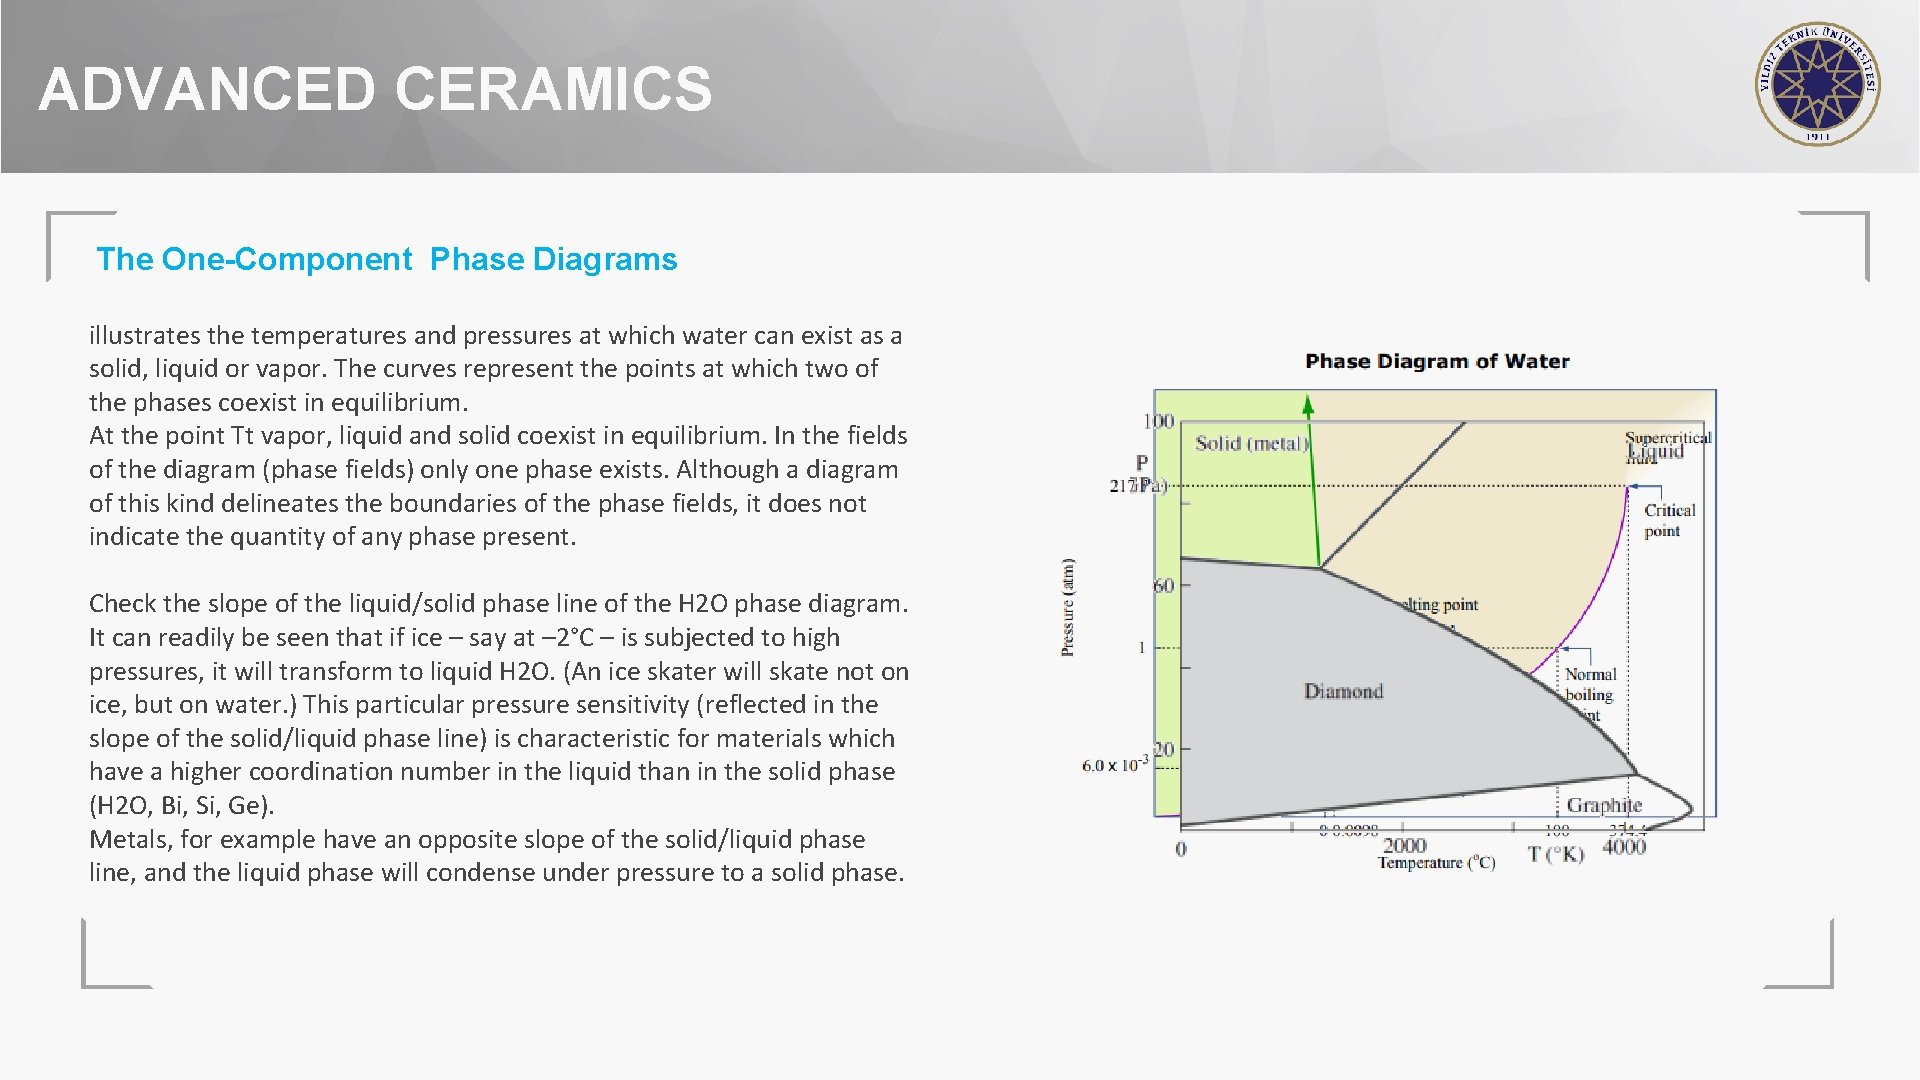 ADVANCED CERAMICS The One-Component Phase Diagrams illustrates the temperatures and pressures at which water